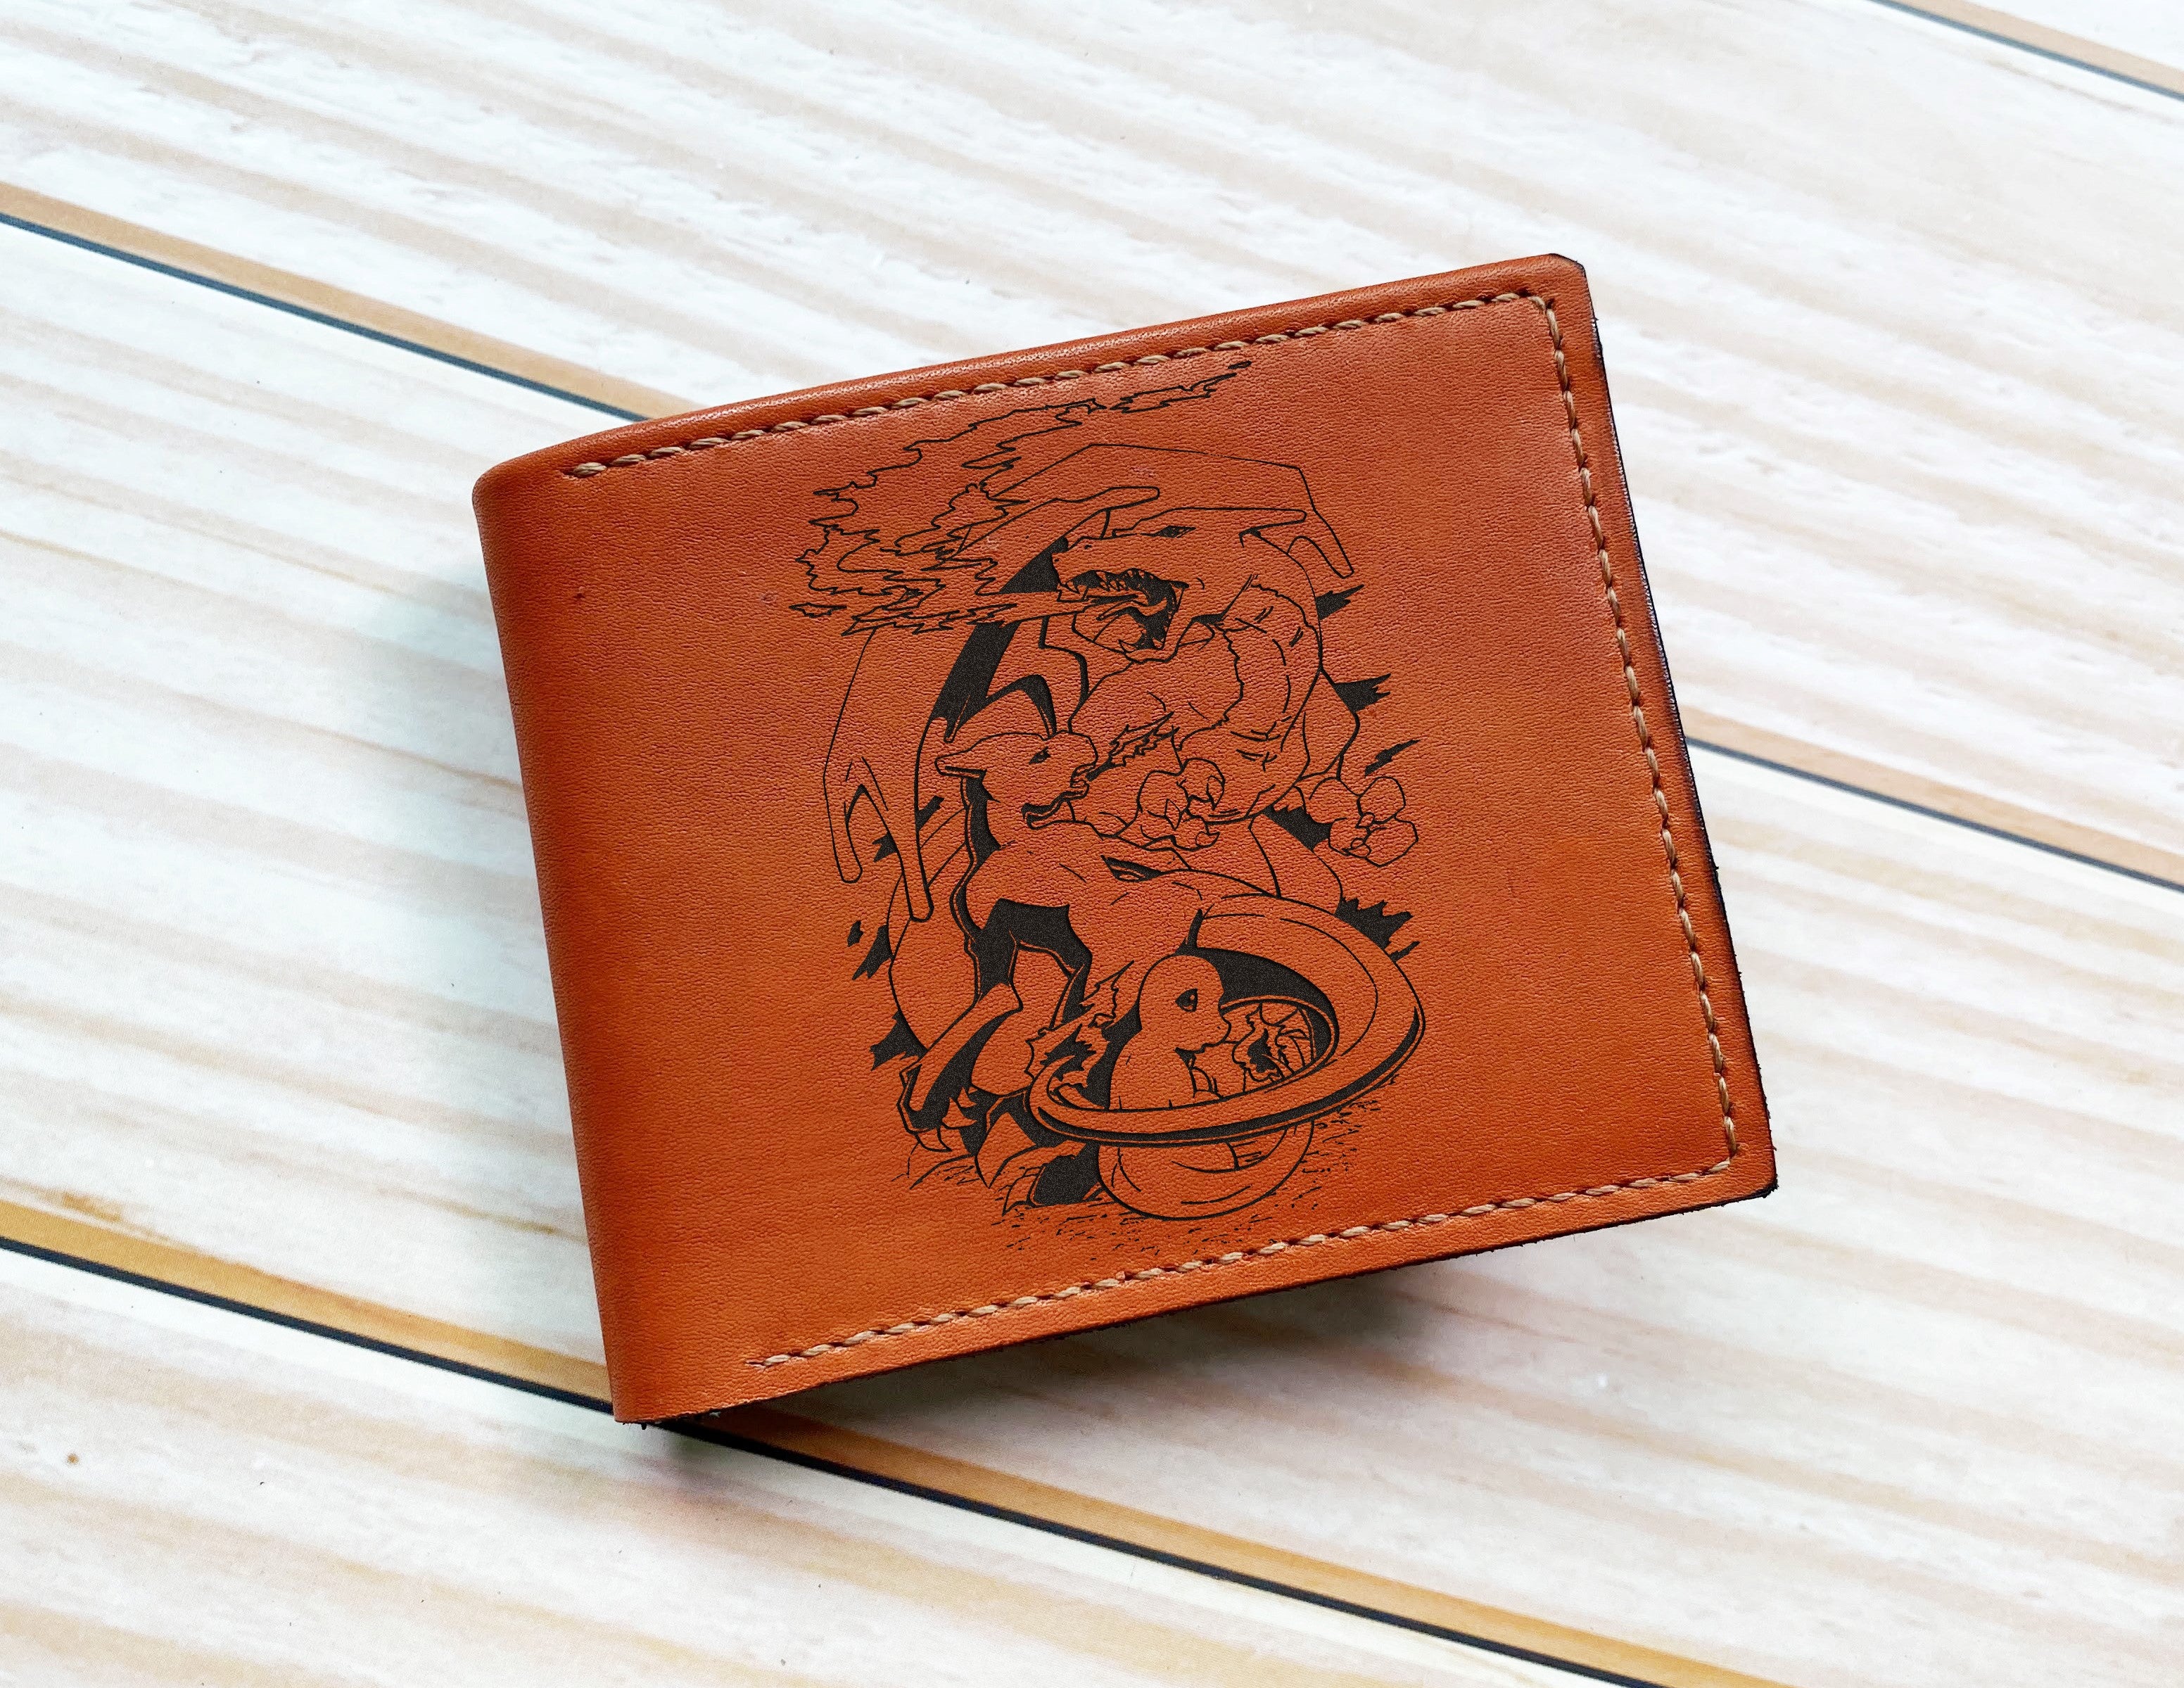 17 Great Leather Gift Ideas for Him - Groovy Guy Gifts